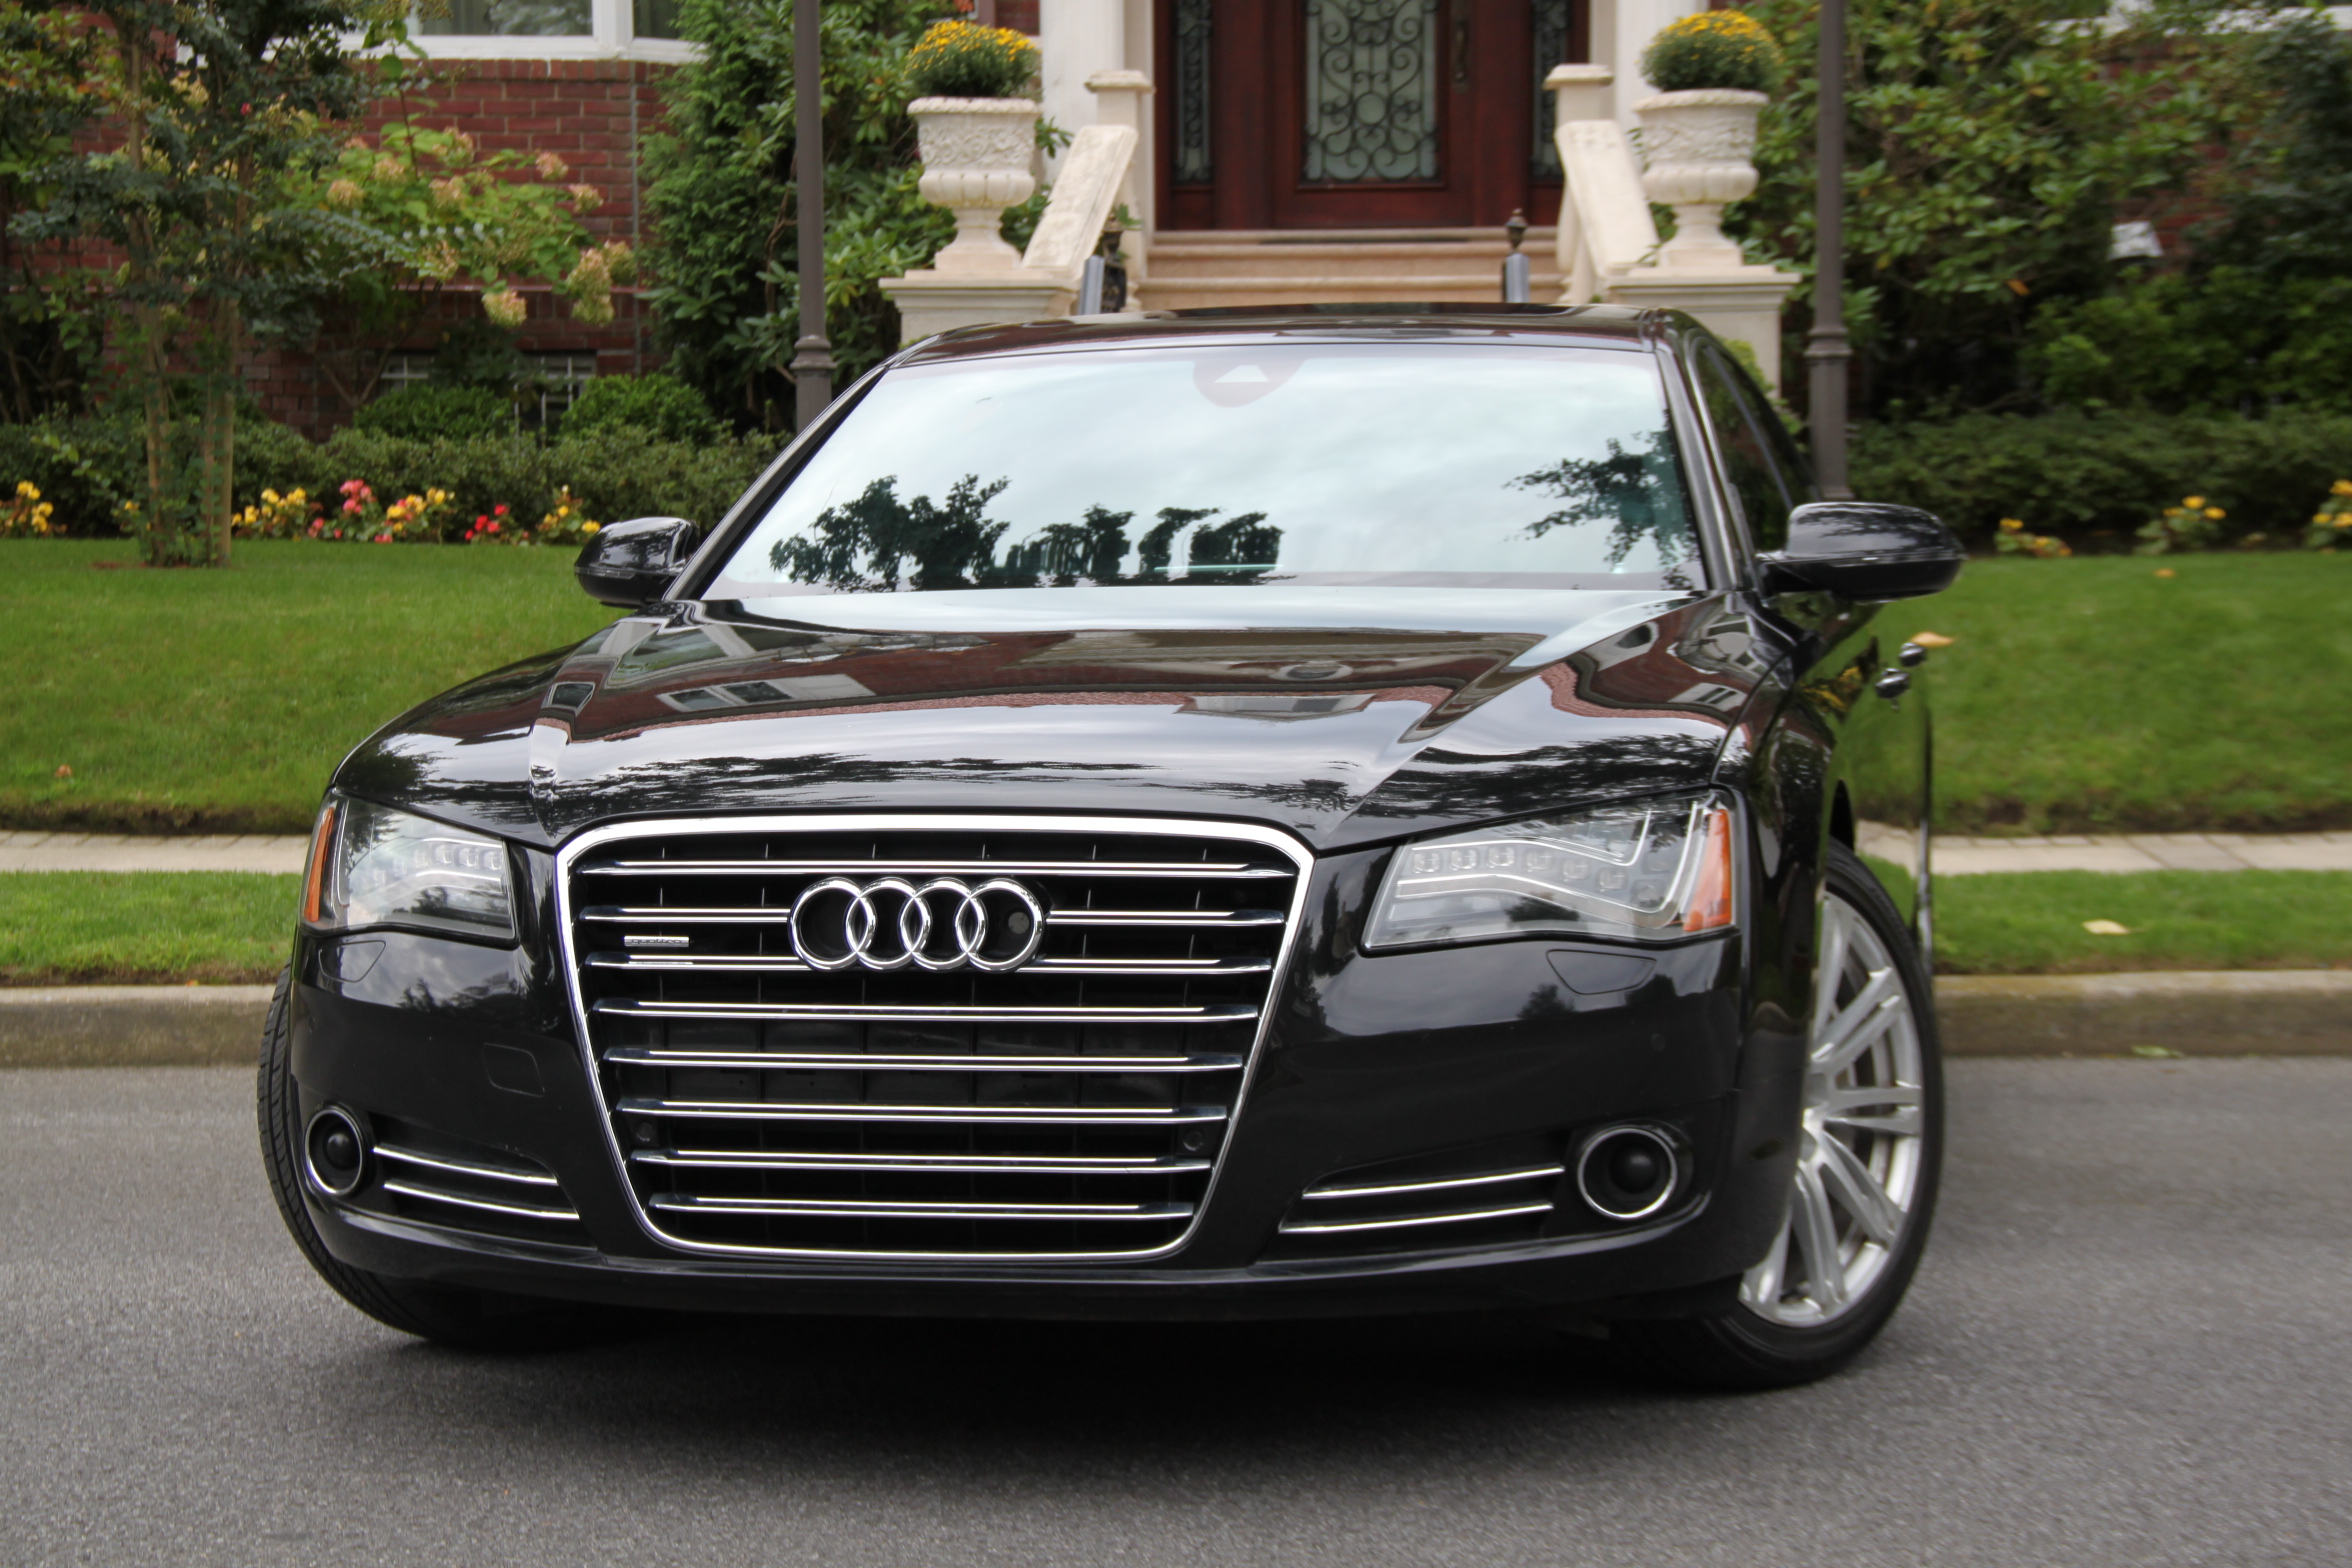 Buy Used 2012 AUDI A8 L QUATTRO PREMIUM for $24 900 from trusted dealer in  Brooklyn, NY!